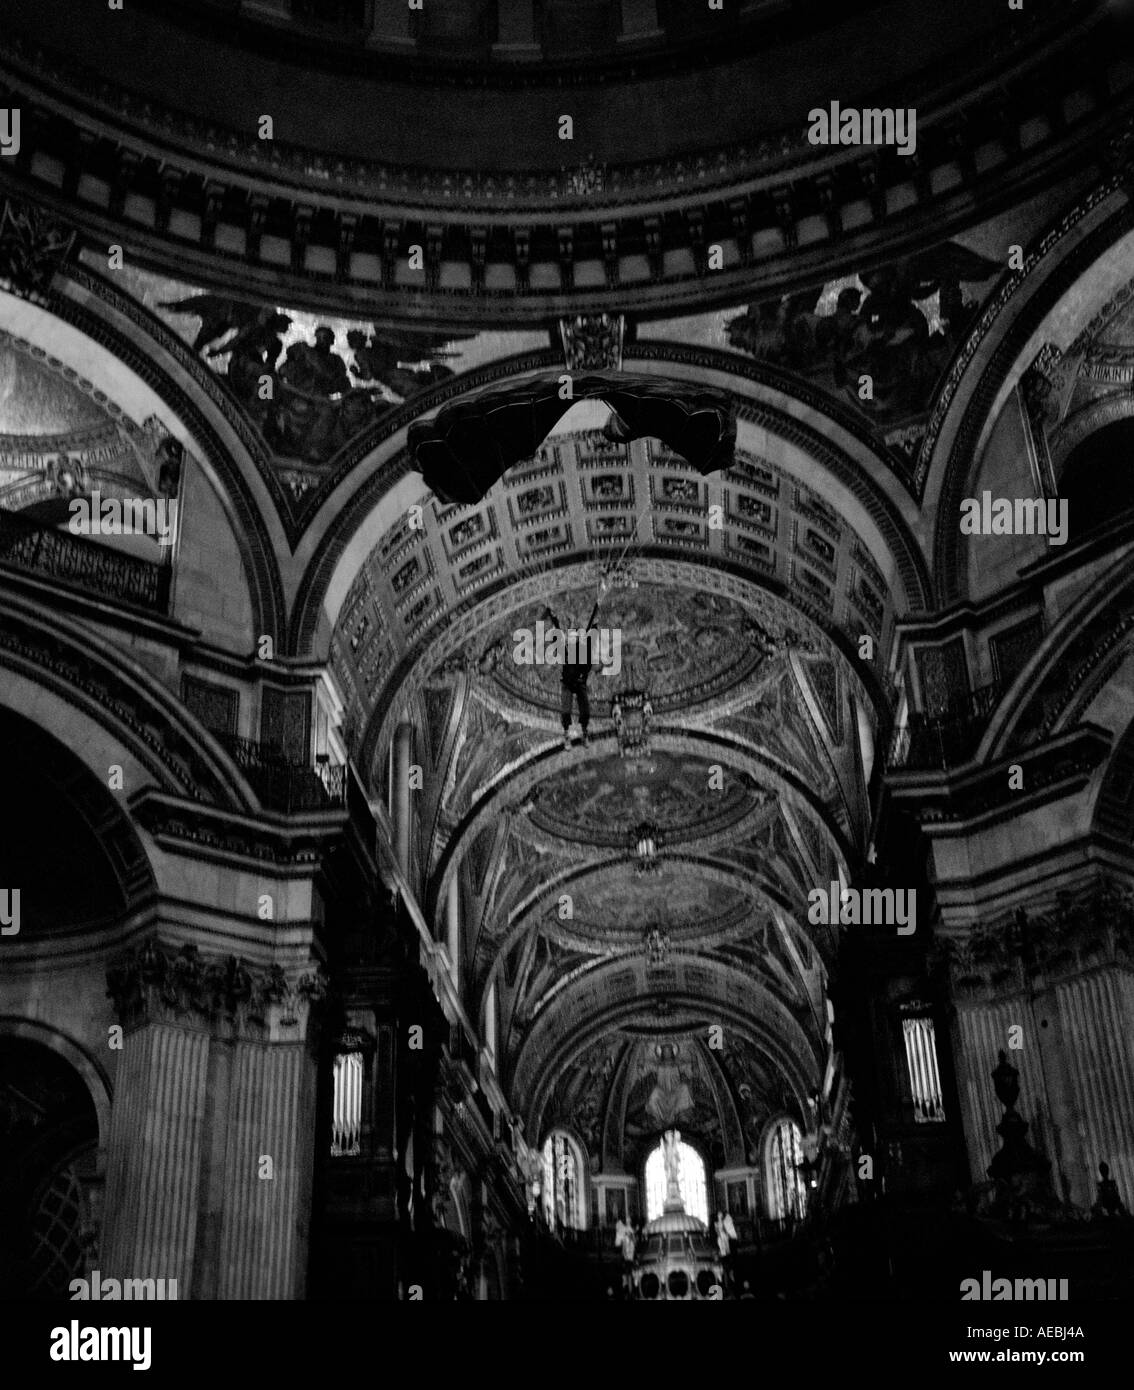 Russell Powell BASE 230 BASE Jumping from the Whispering Gallery inside St Pauls Cathedral London. Picture copyright Doug Blane. Stock Photo